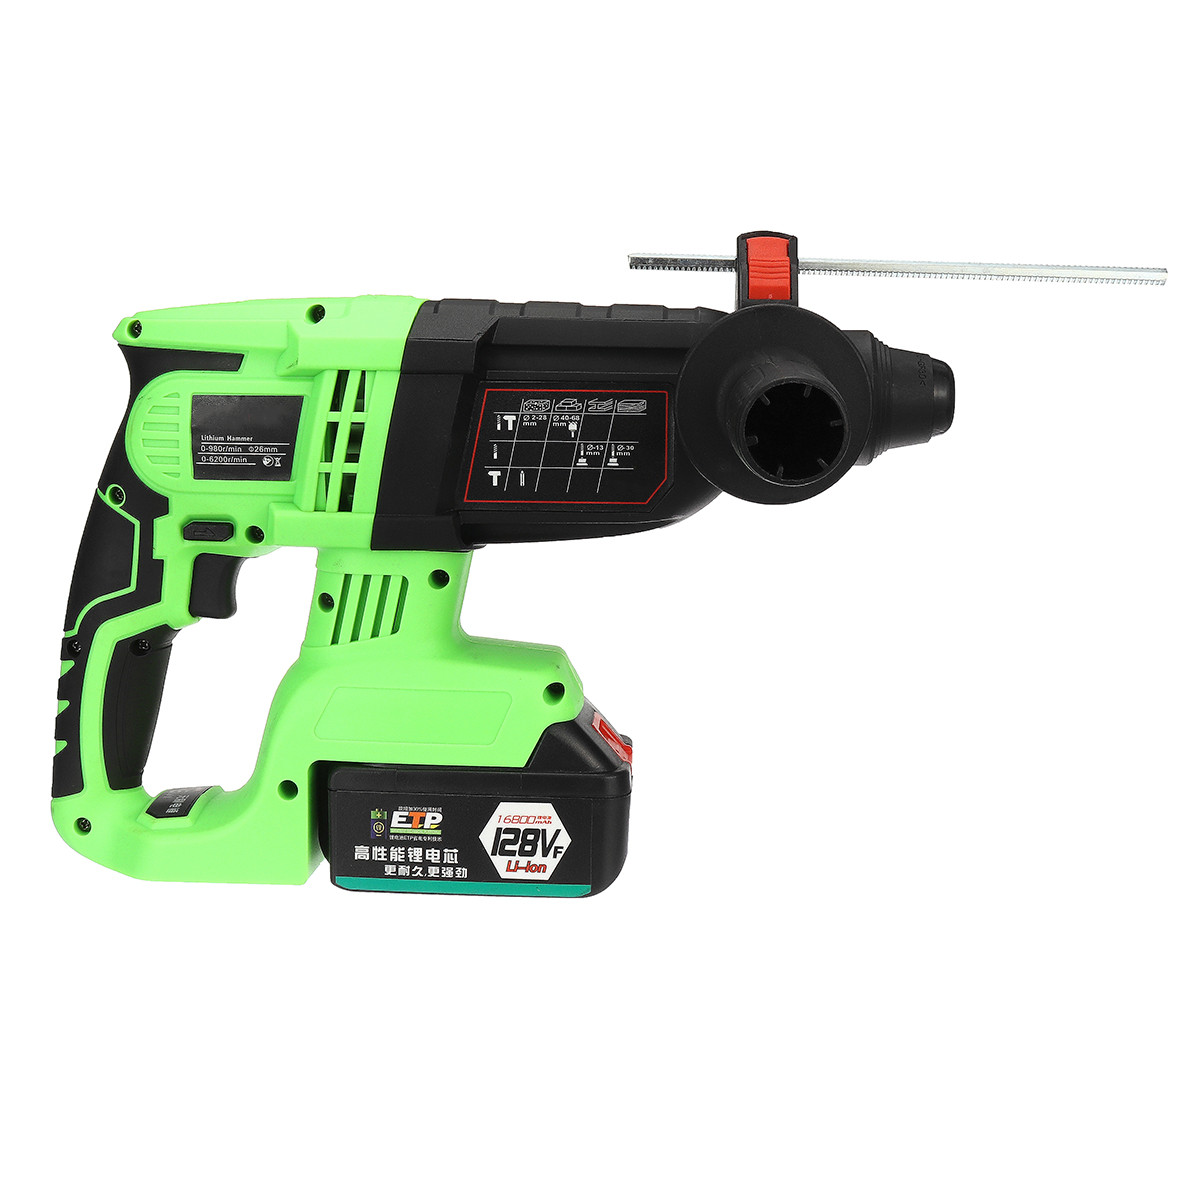 128VF-16800mAh-Brushless-Electric-Cordless-Impact-Hammer-High-Torque-Drill-with-Rechargeable-Battery-1522123-8